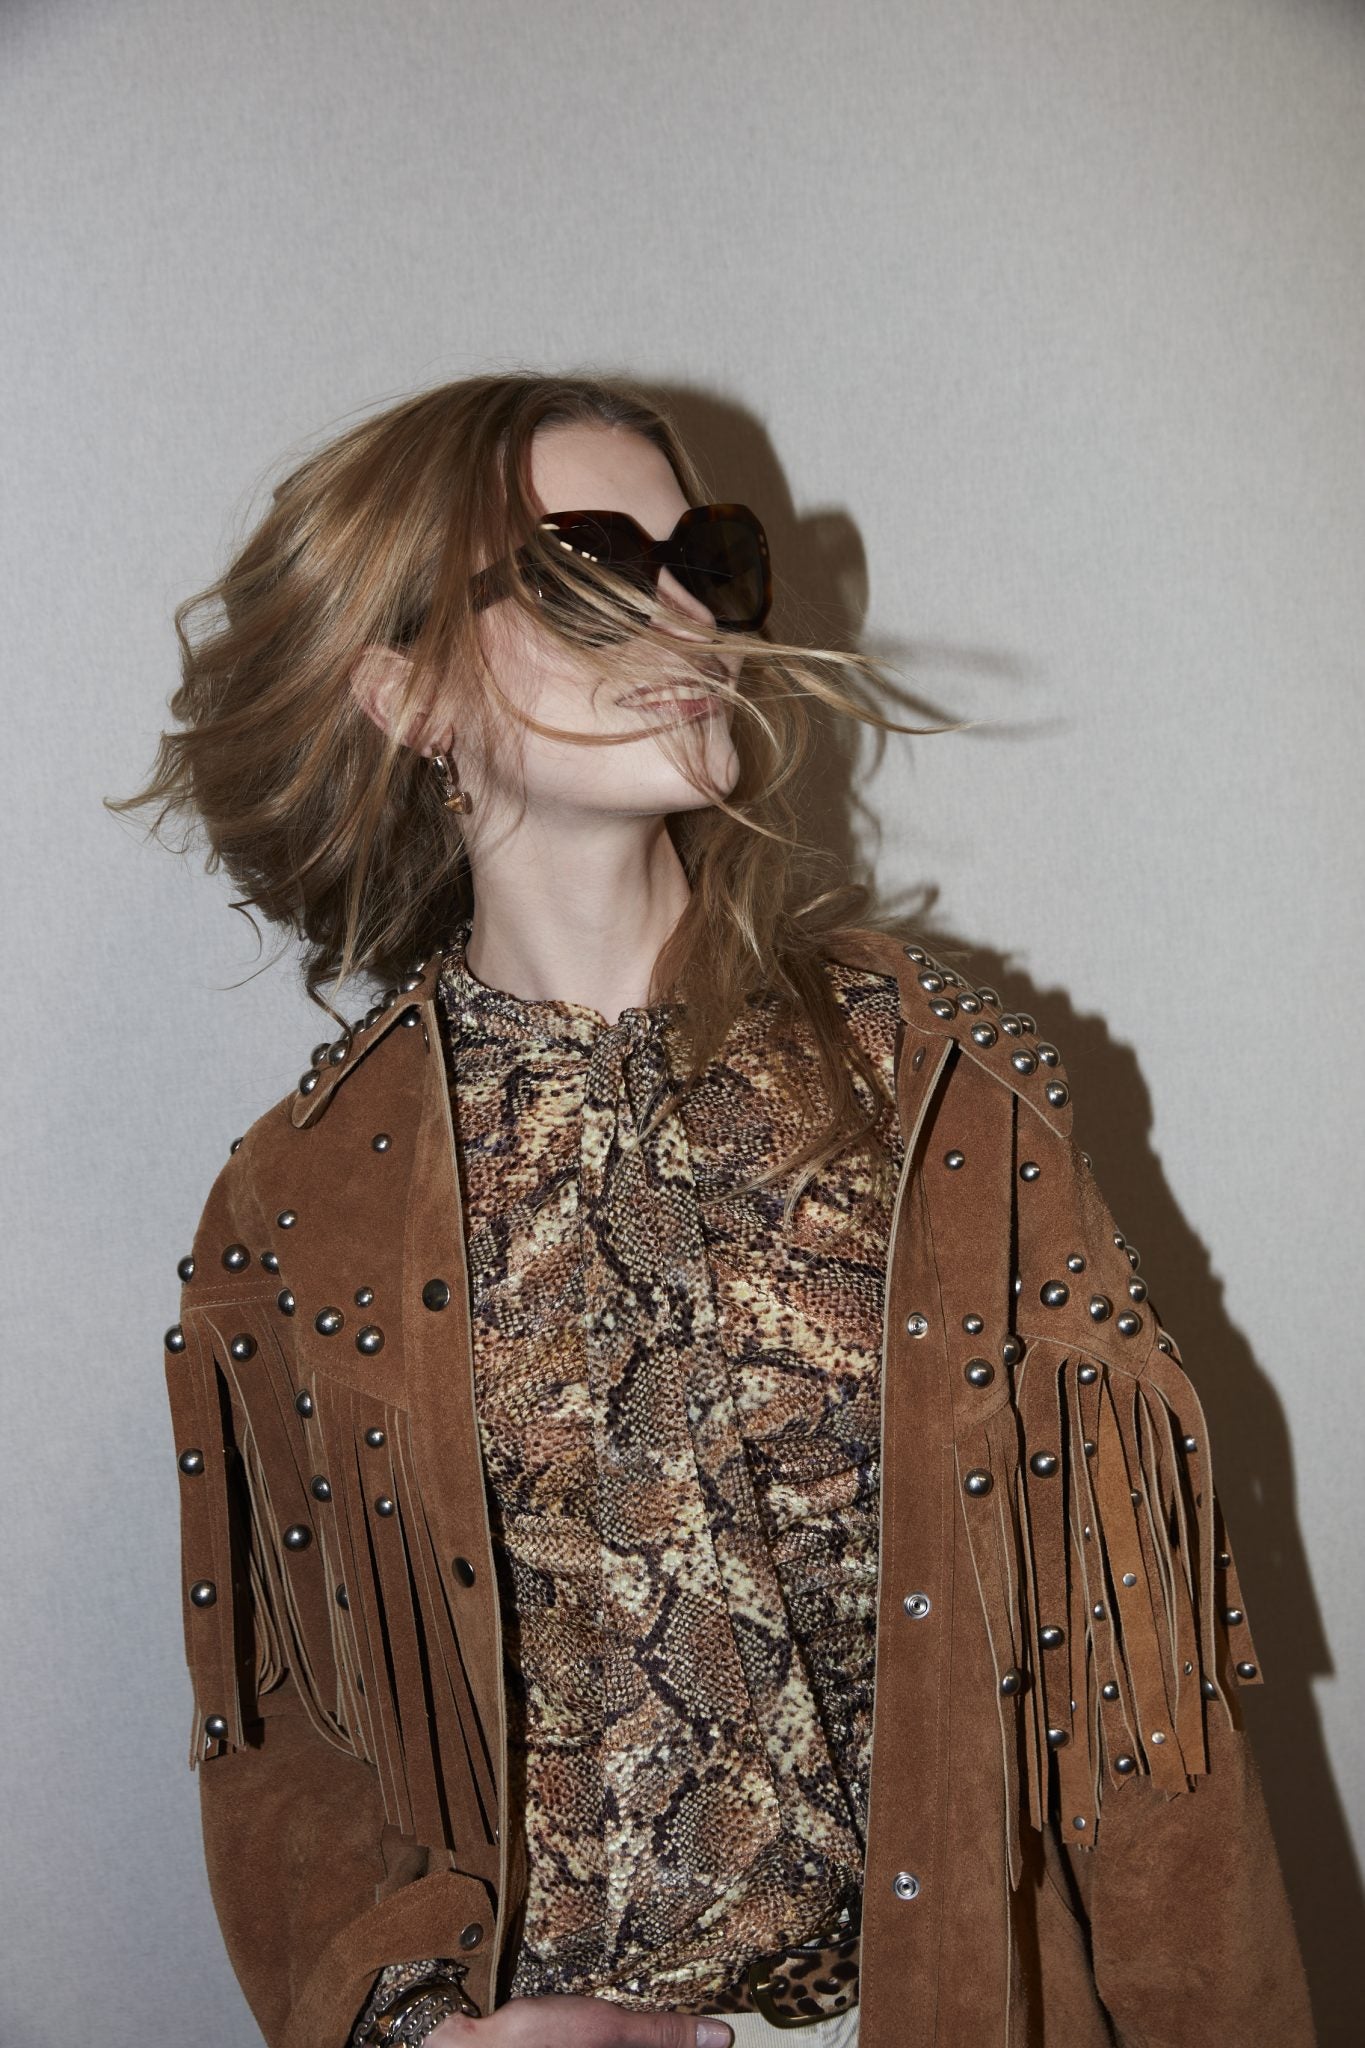 Cropped backstage image of female model in large sunglasses, a light brown suede fringed jacket with metallic bead details and a snakeskin-printed blouse.